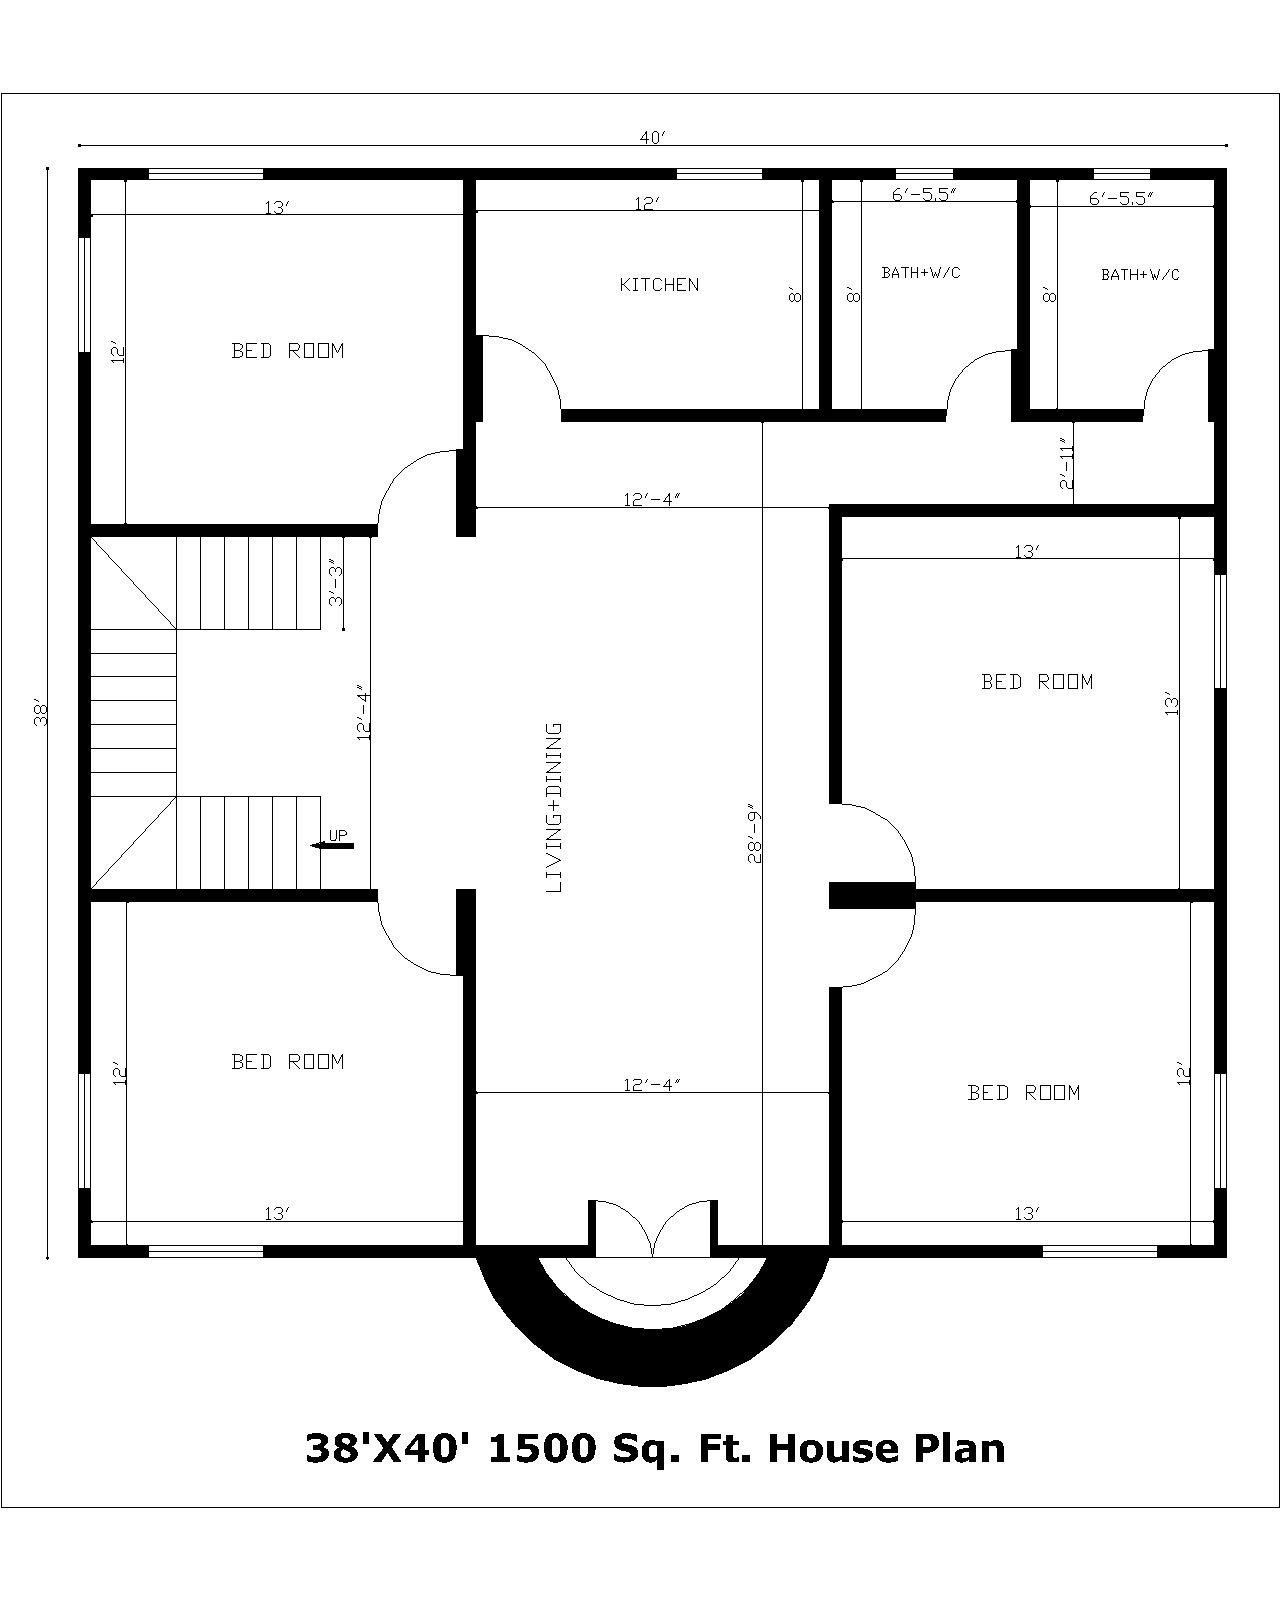 1500 Sq. Ft. House Plans